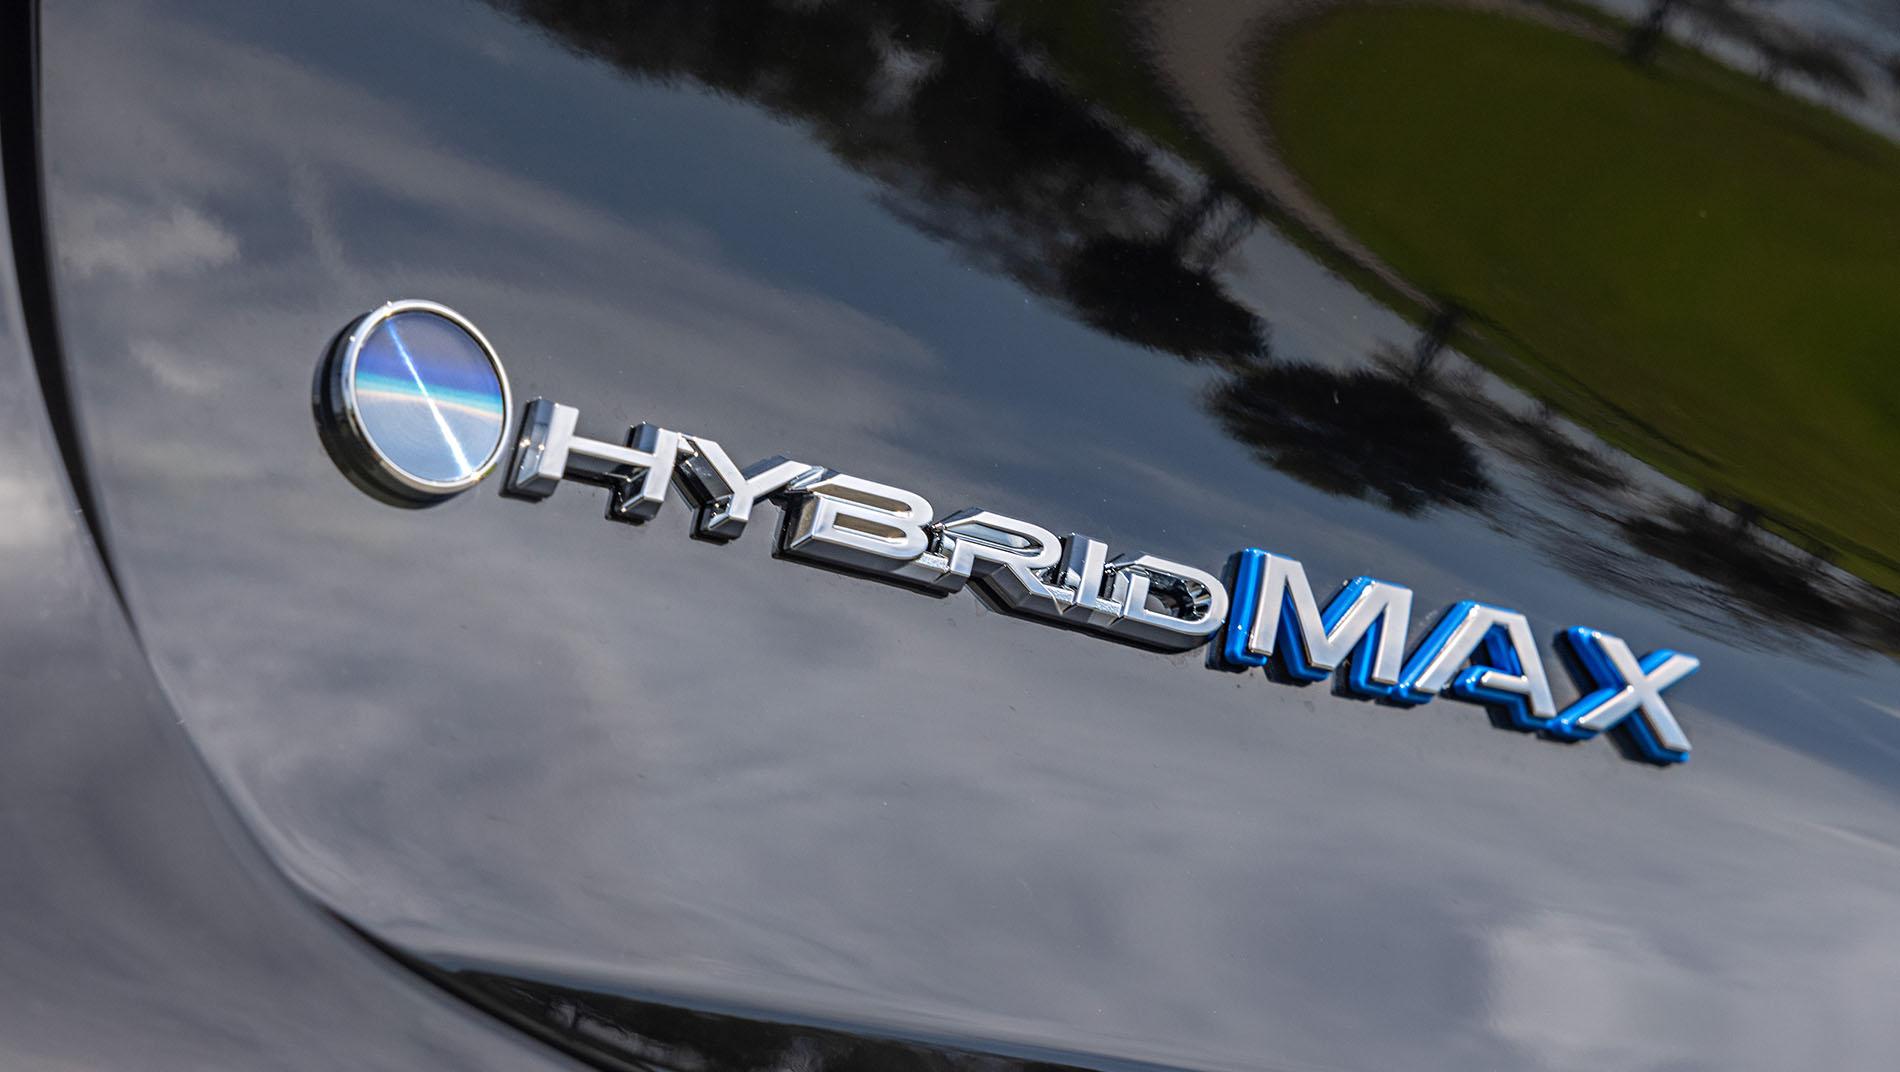 Toyota Hybrid Max badge, Toyota hybrid max gives you the benefits of a hybrid with more towing power